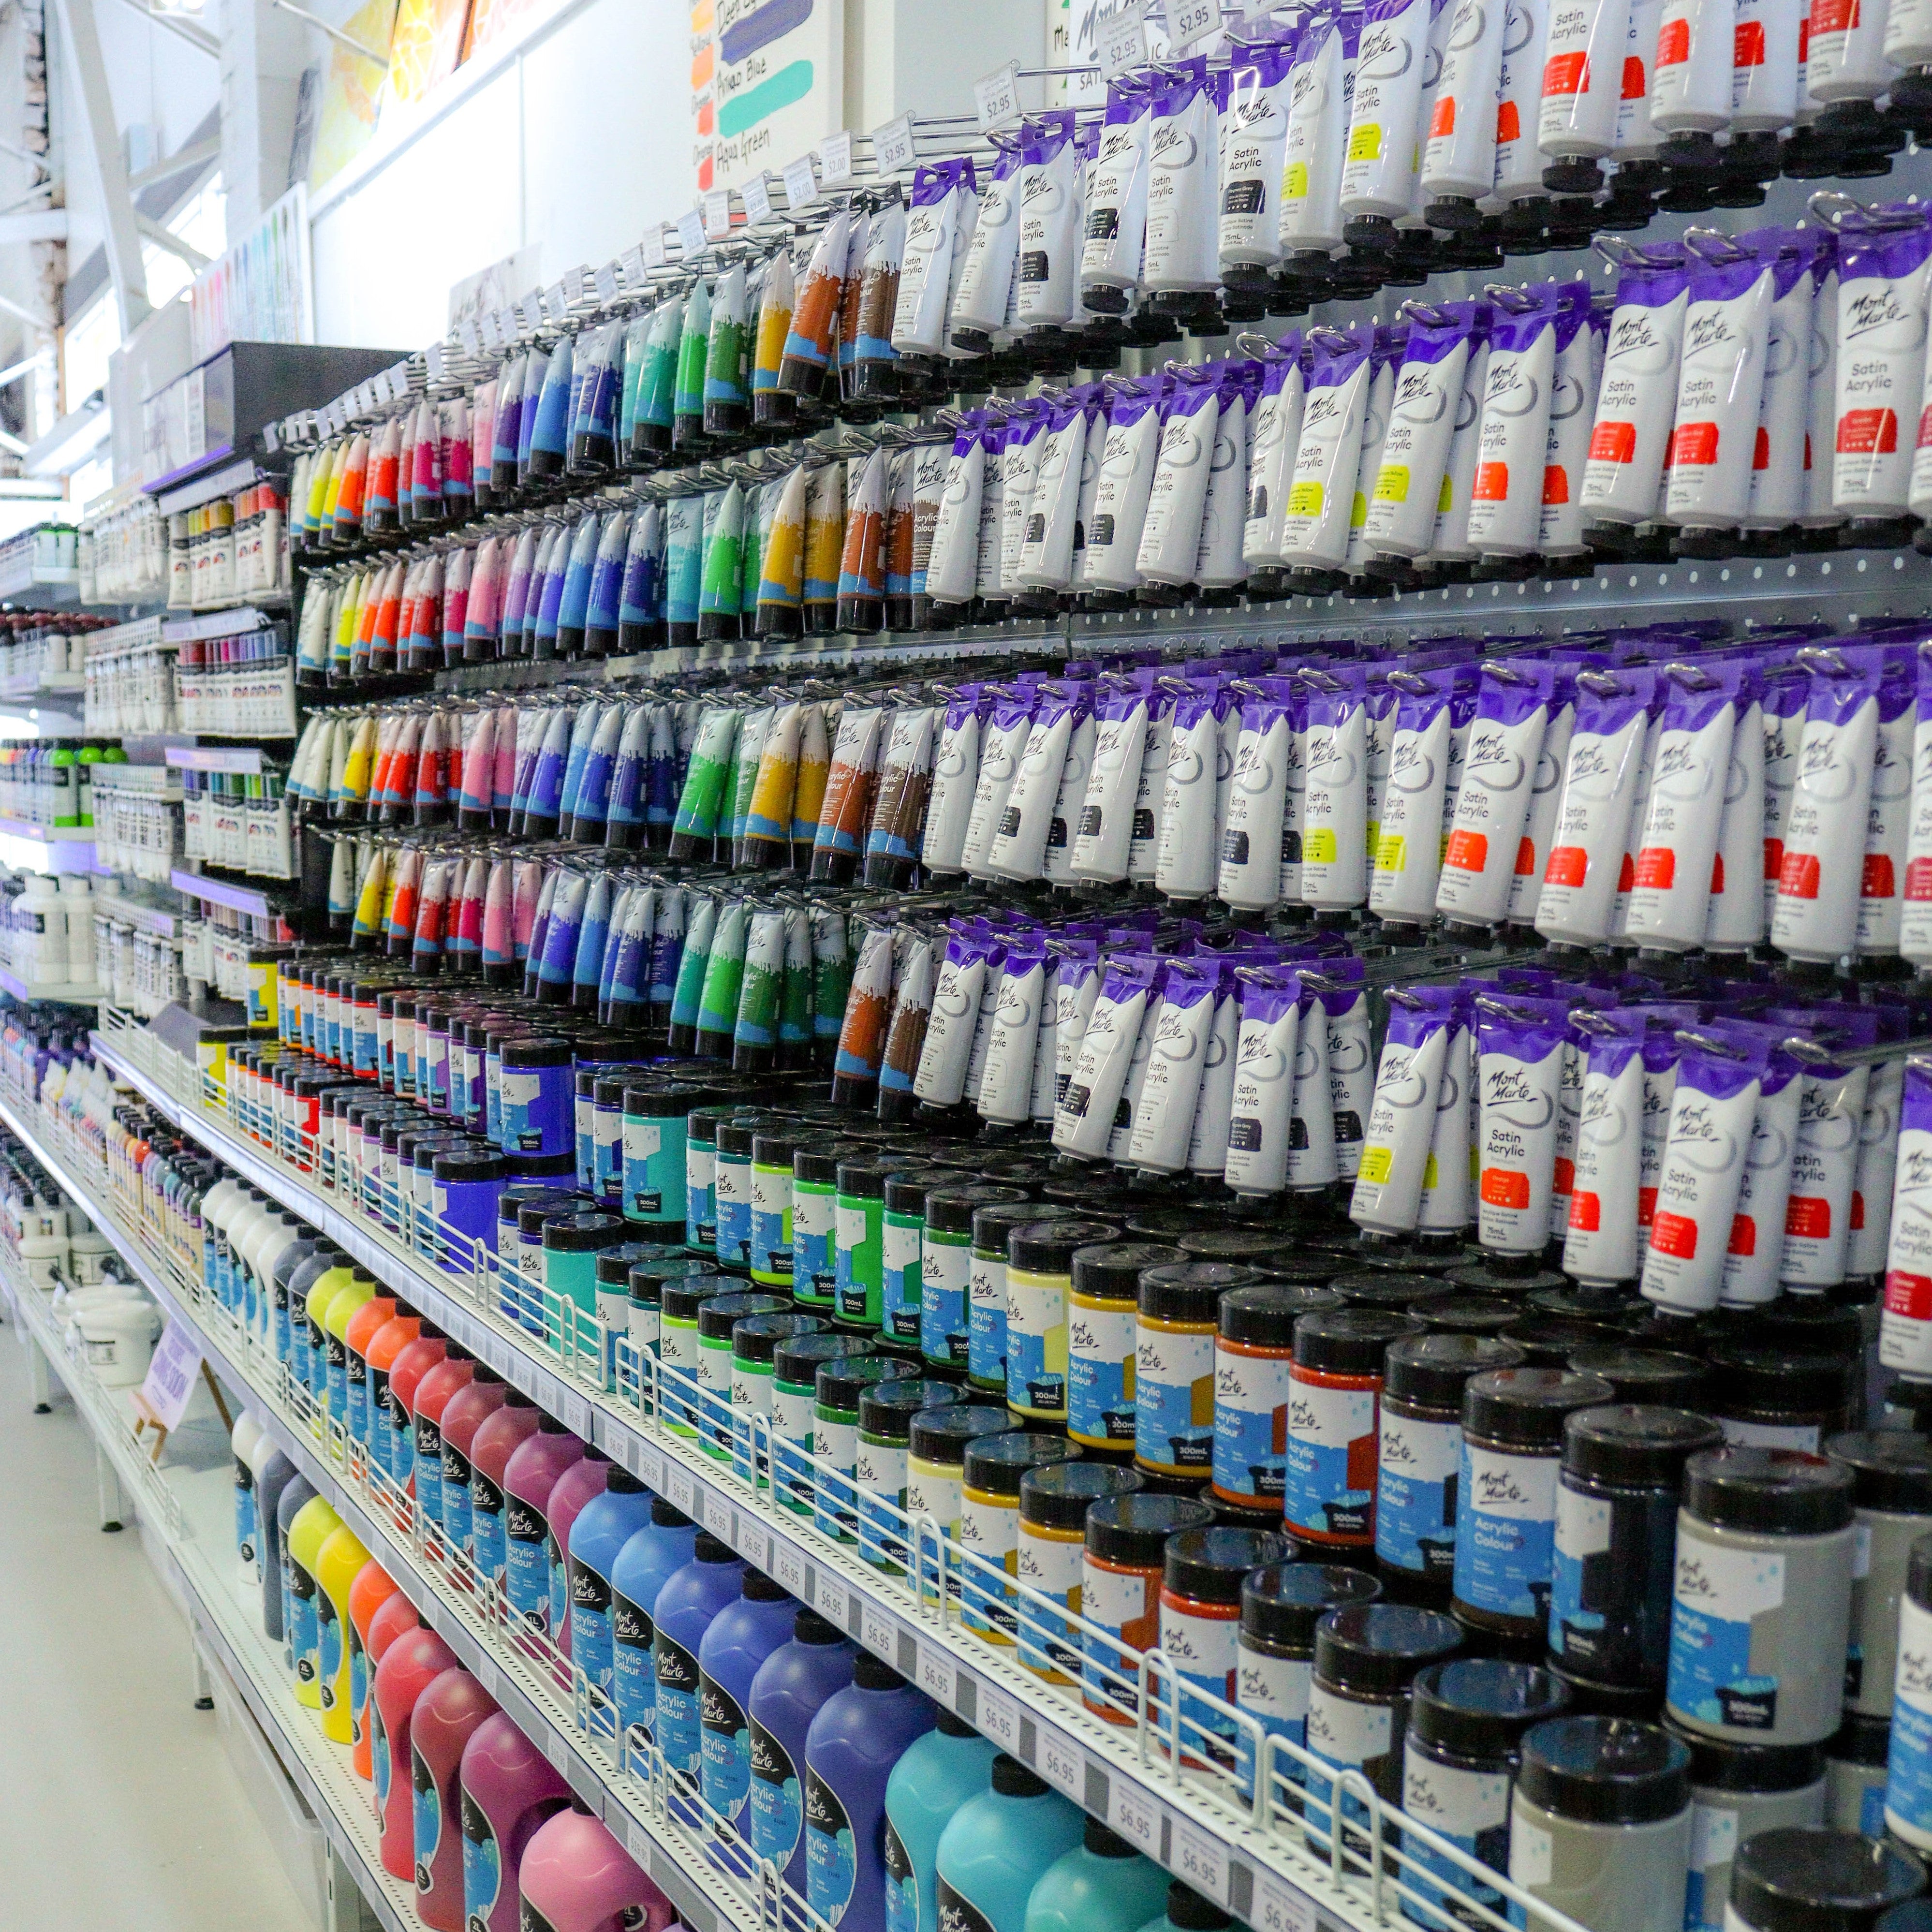 5. Platinum art centre Art Shed Moorabbin's paint products looking like a candy store of Mont Marte art supplies.